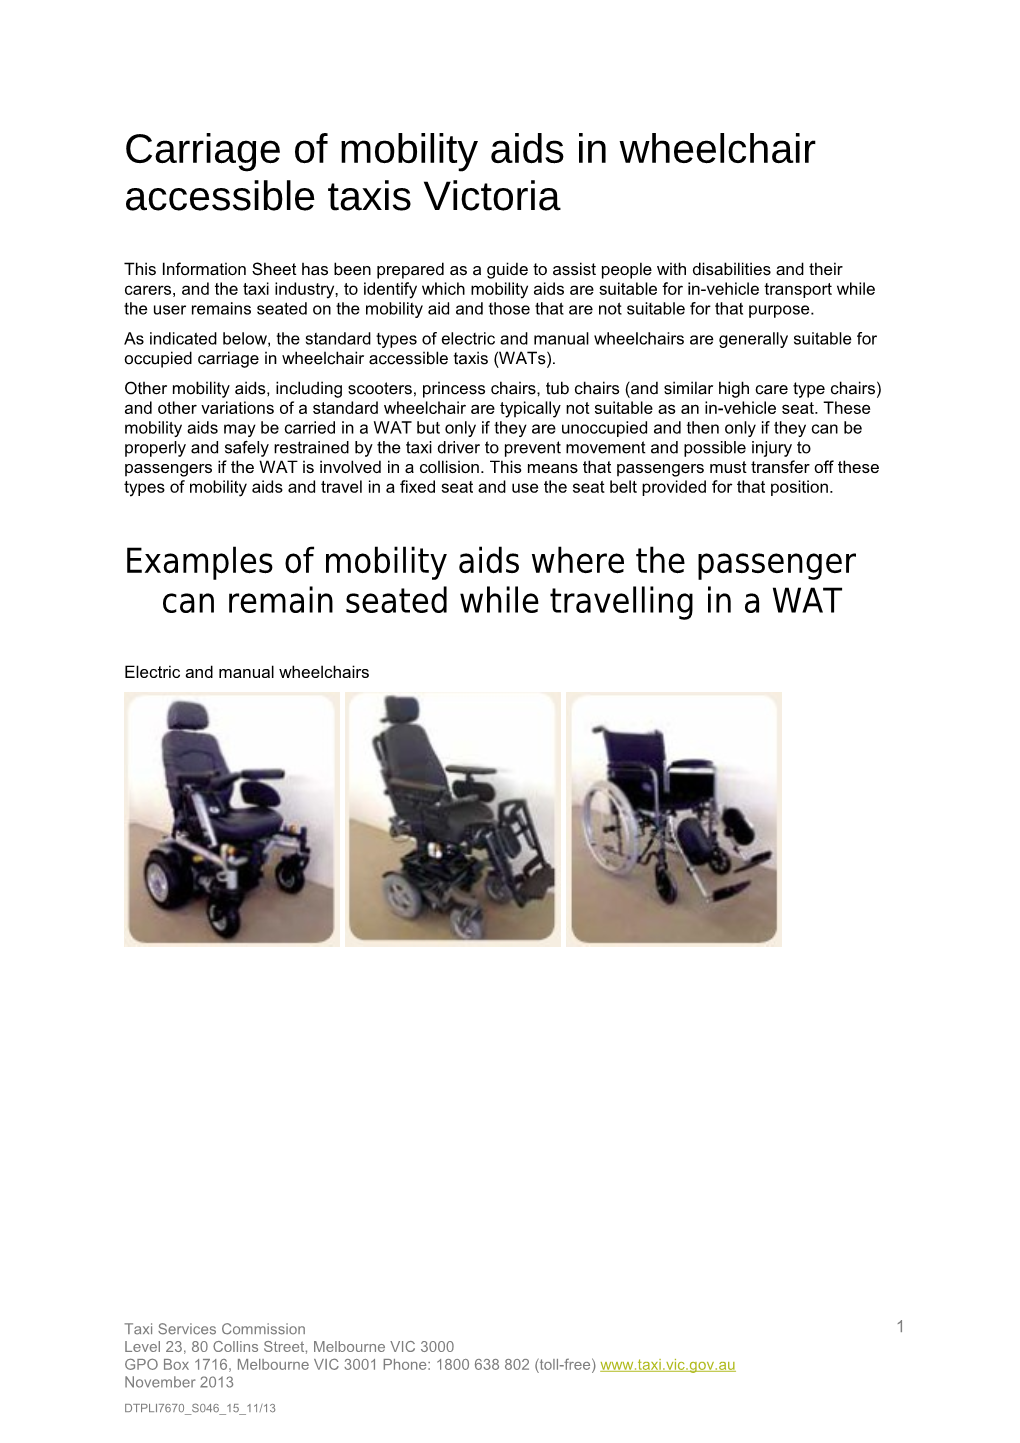 Information Sheet - Mobility Aids in Wheelchair Accessible Taxis - Accessible Version